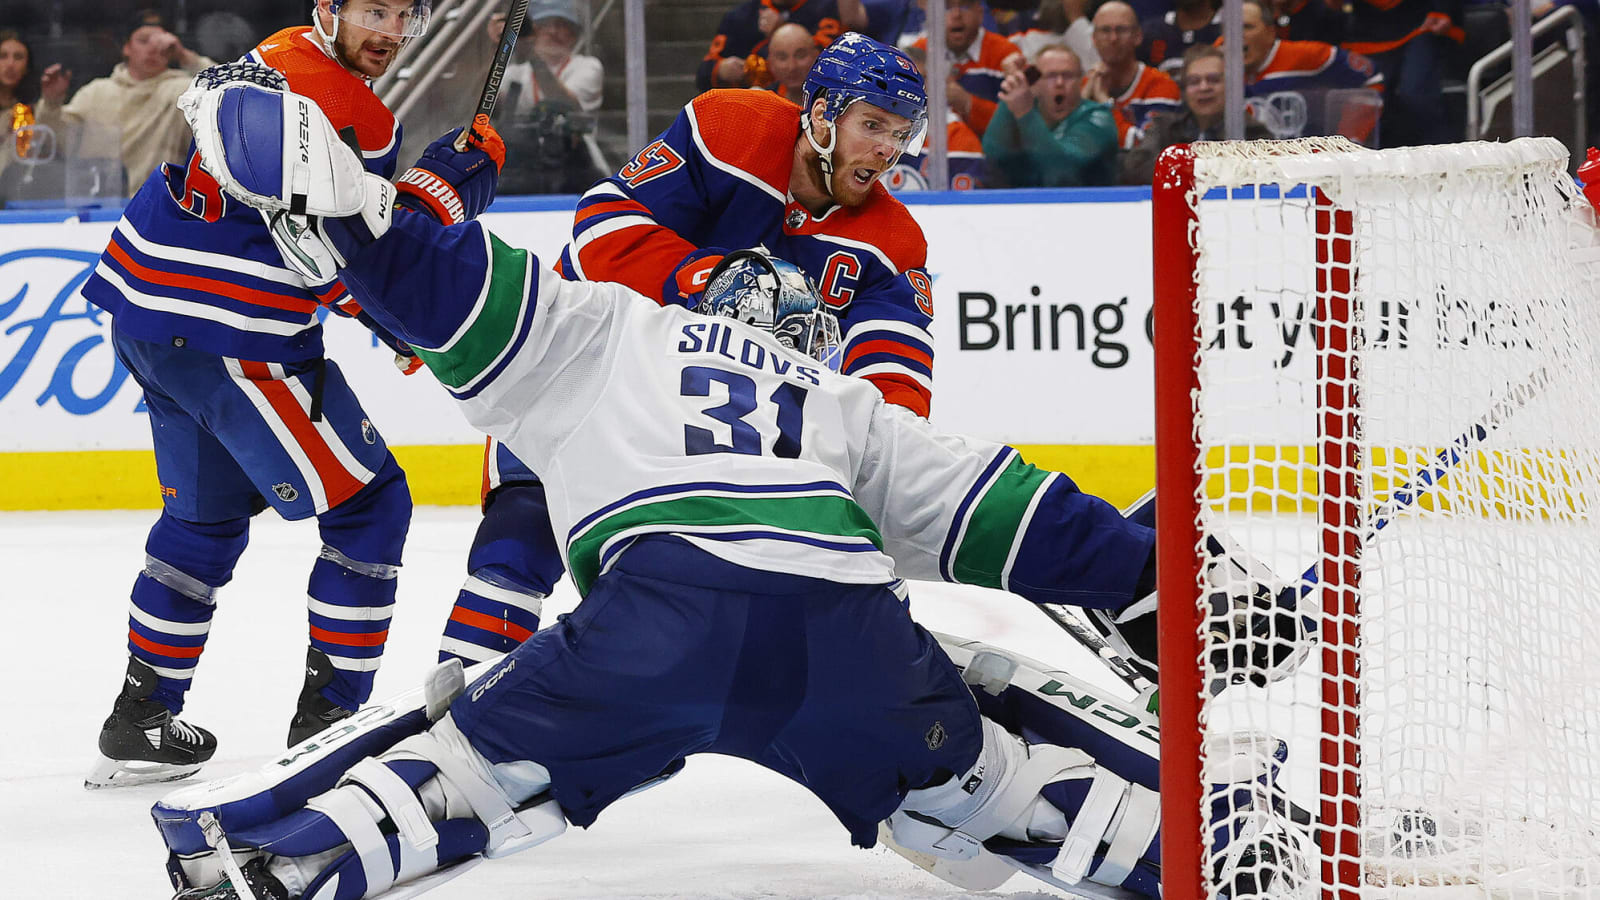 Arturs Silovs Steals Game 3 for Canucks With 42 Saves